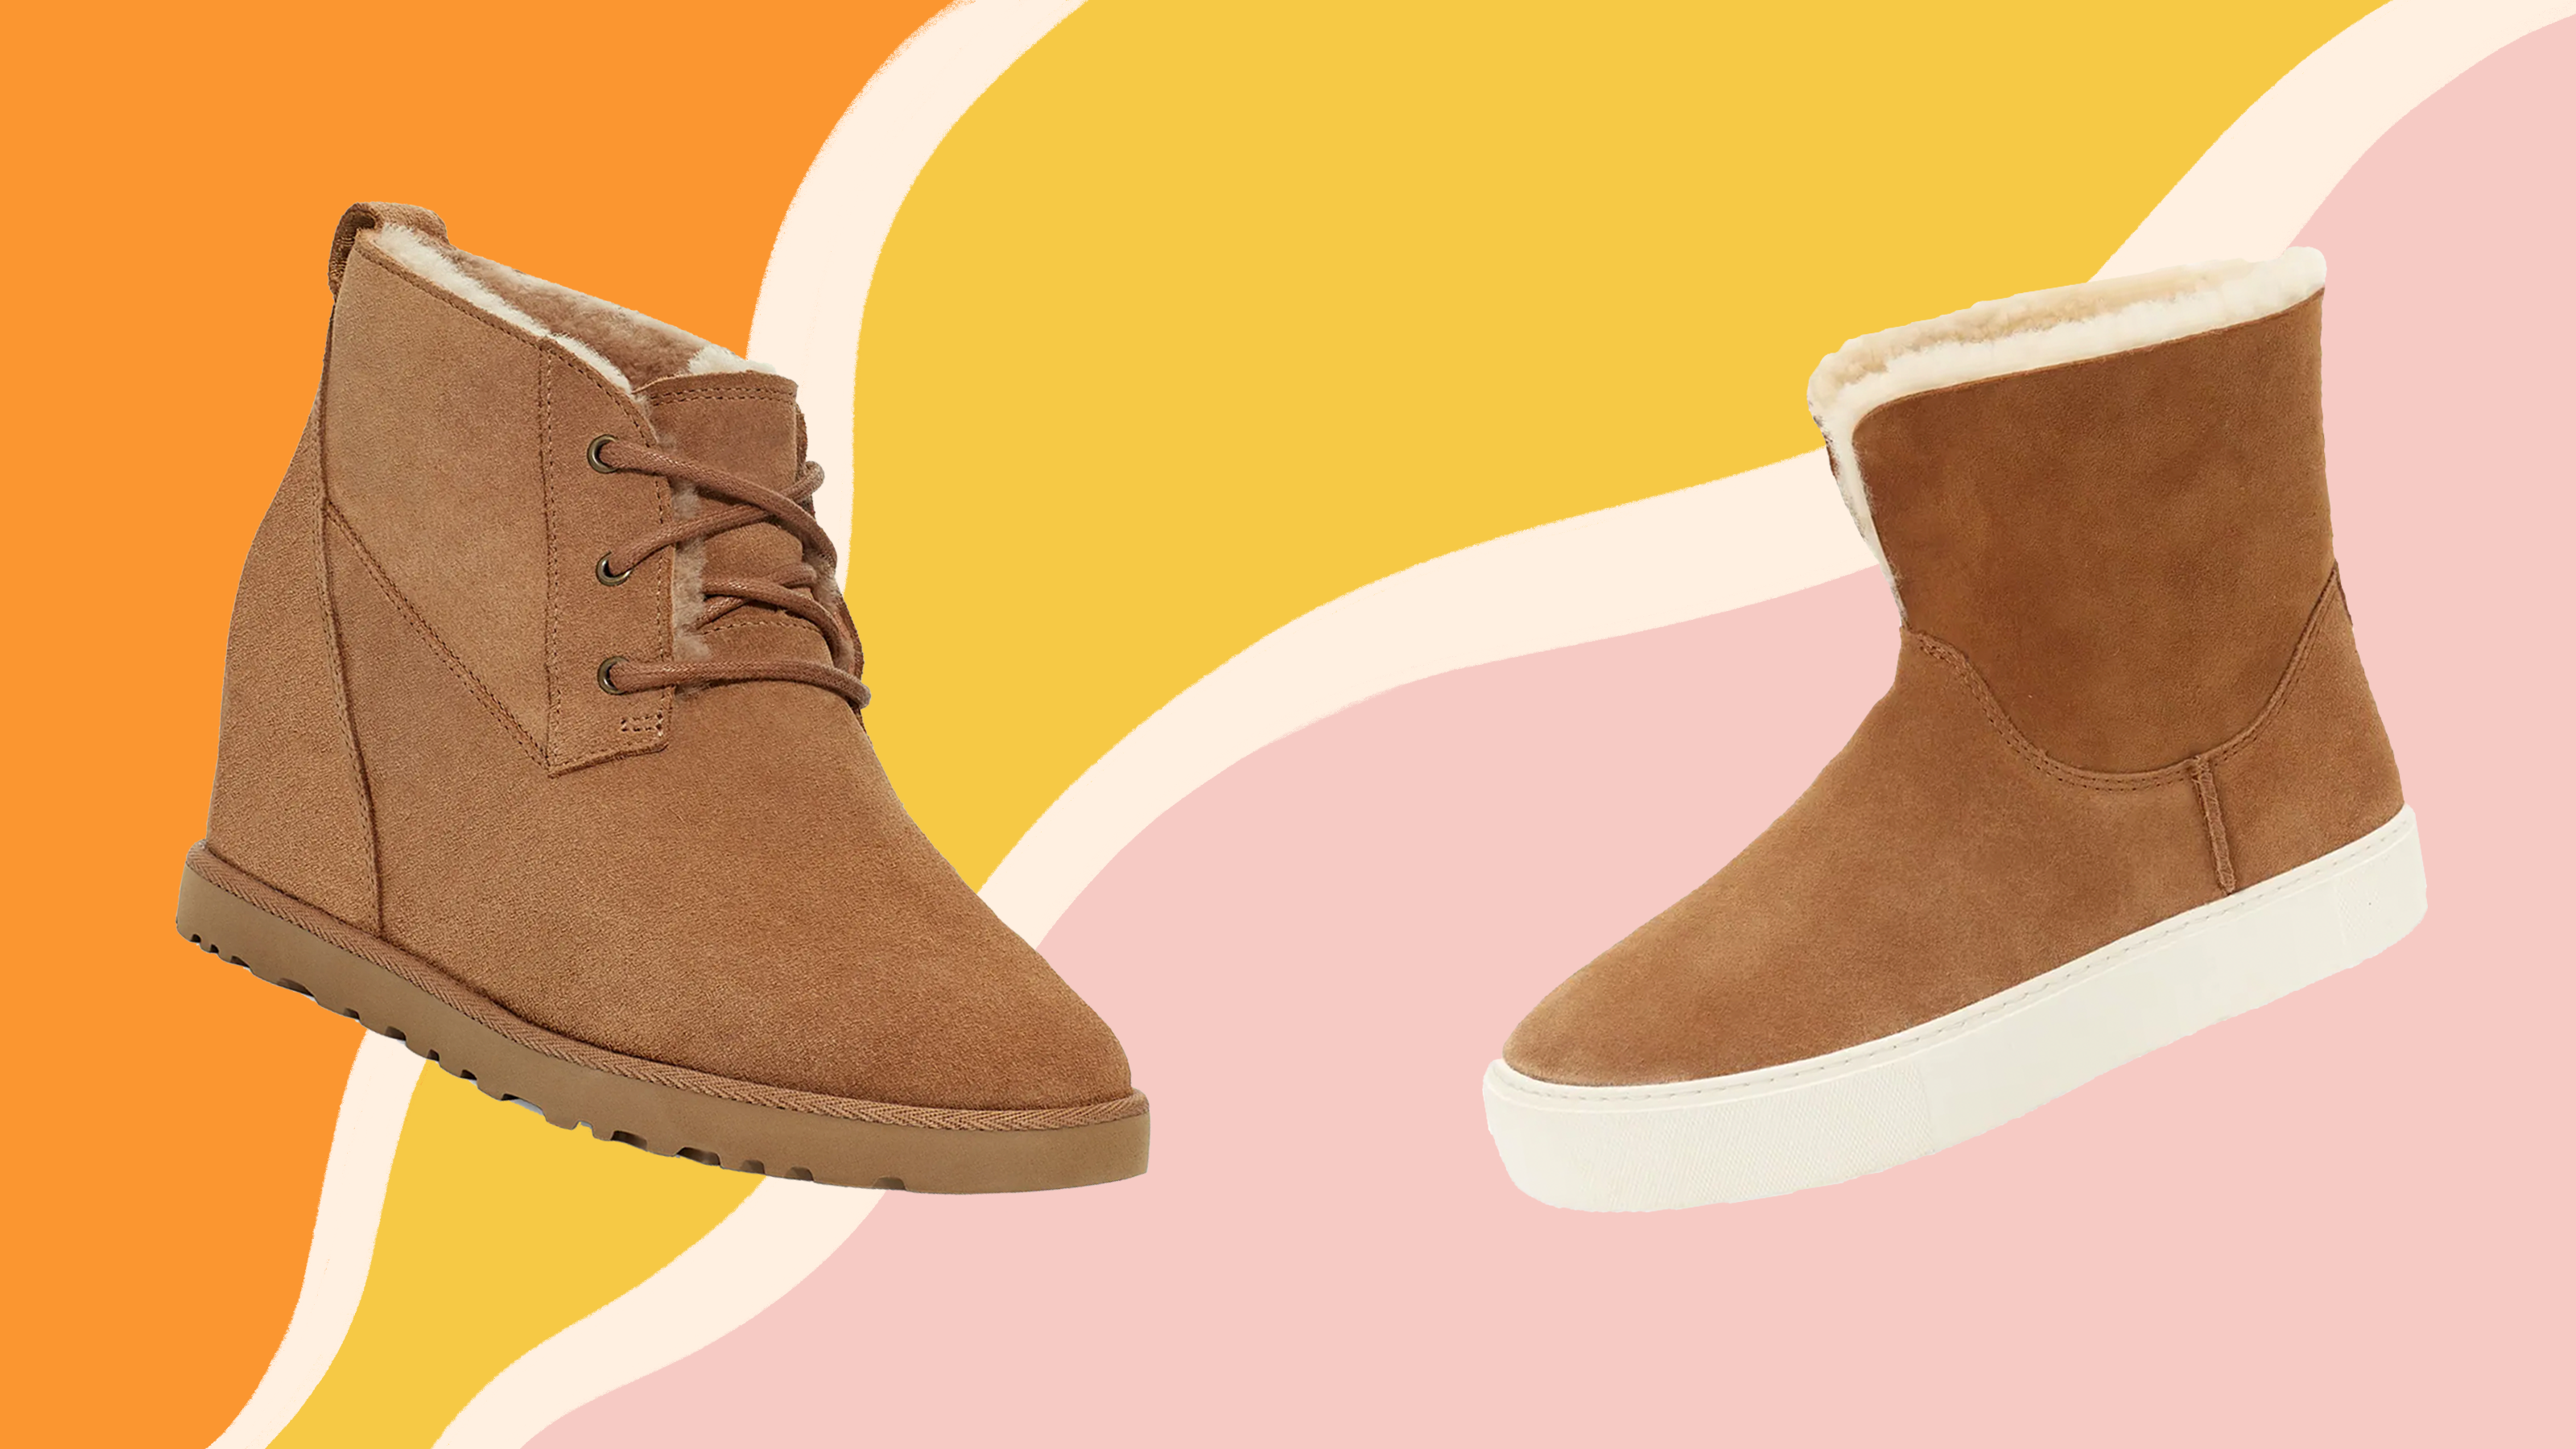 how to make ugg boots stand up